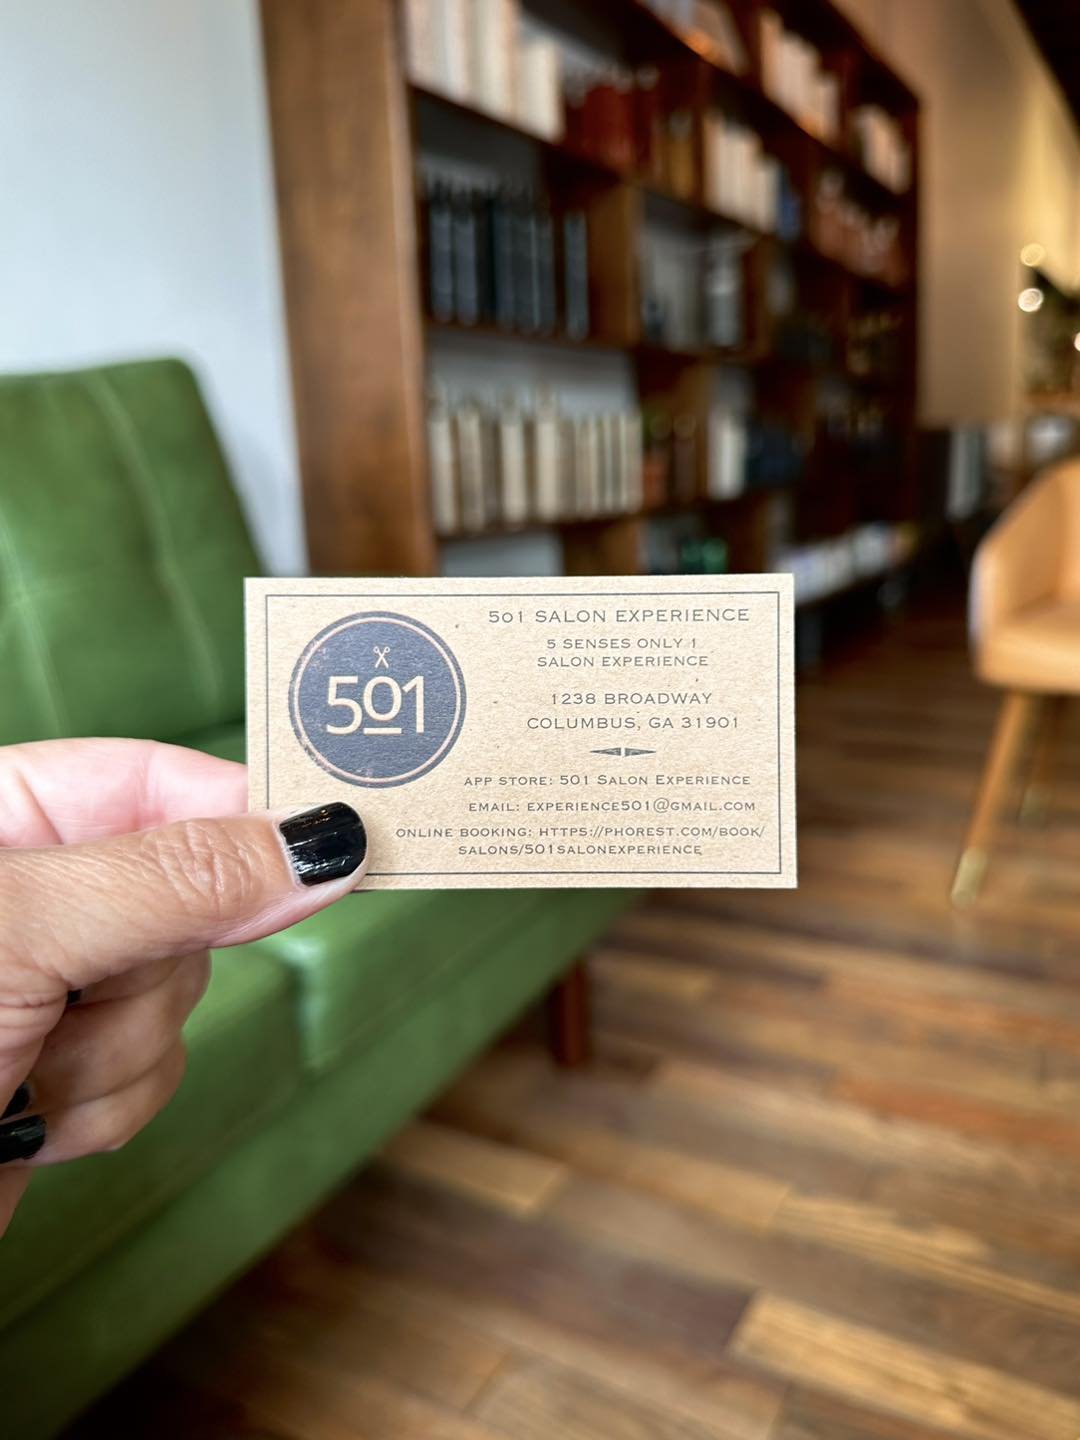 All the &lsquo;need to know&rsquo; info on one perfect little card!! Returning clients &mdash; this one&rsquo;s for you! 🤗 You can keep in touch using our email, check availability with our app, and rebook past appointments with our online booking! 